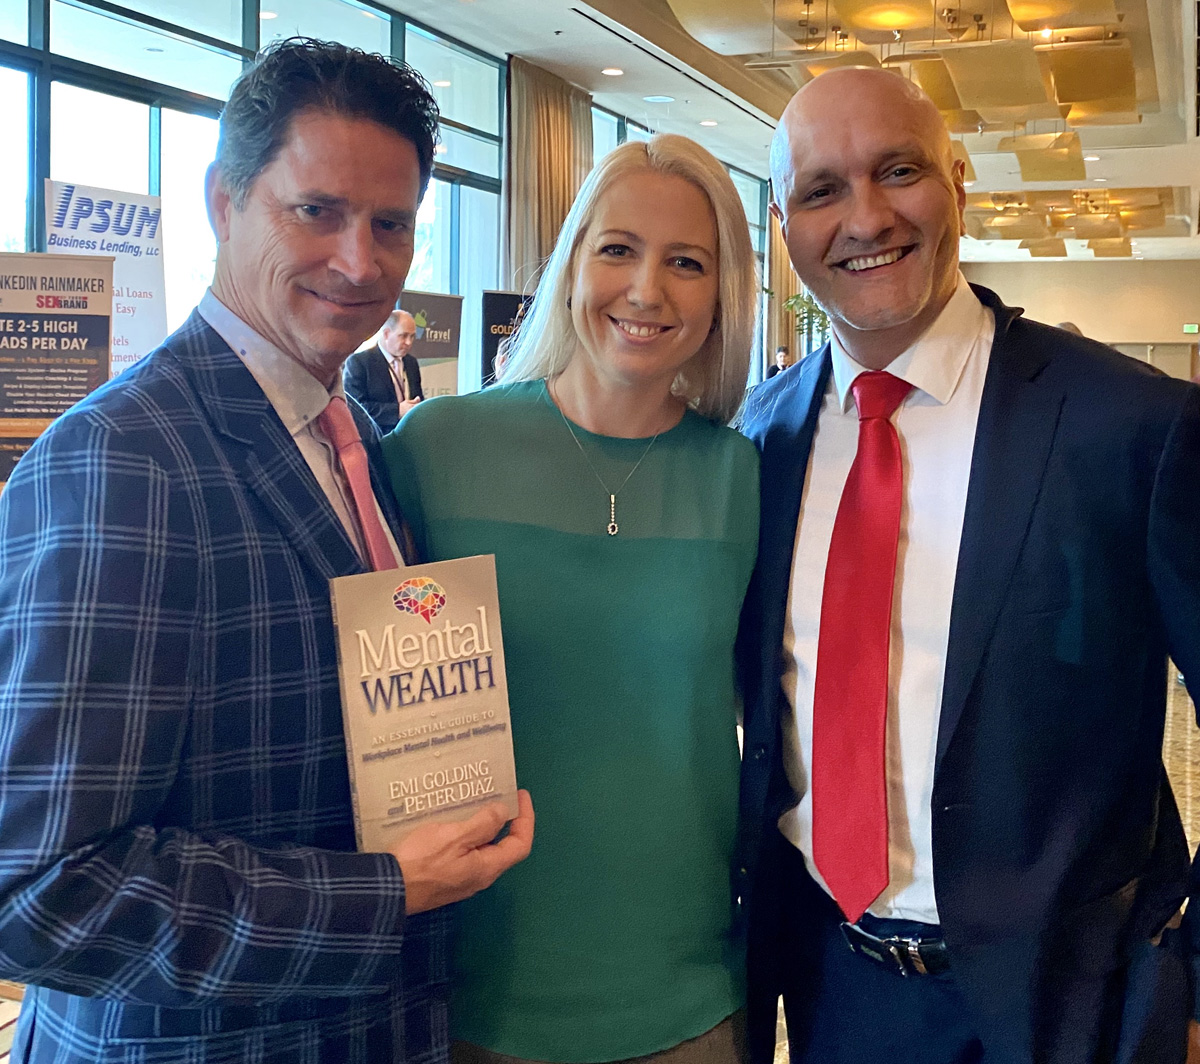 Dan Eckelman from USA with Emi Golding and Peter Diaz with Mental Wealth book